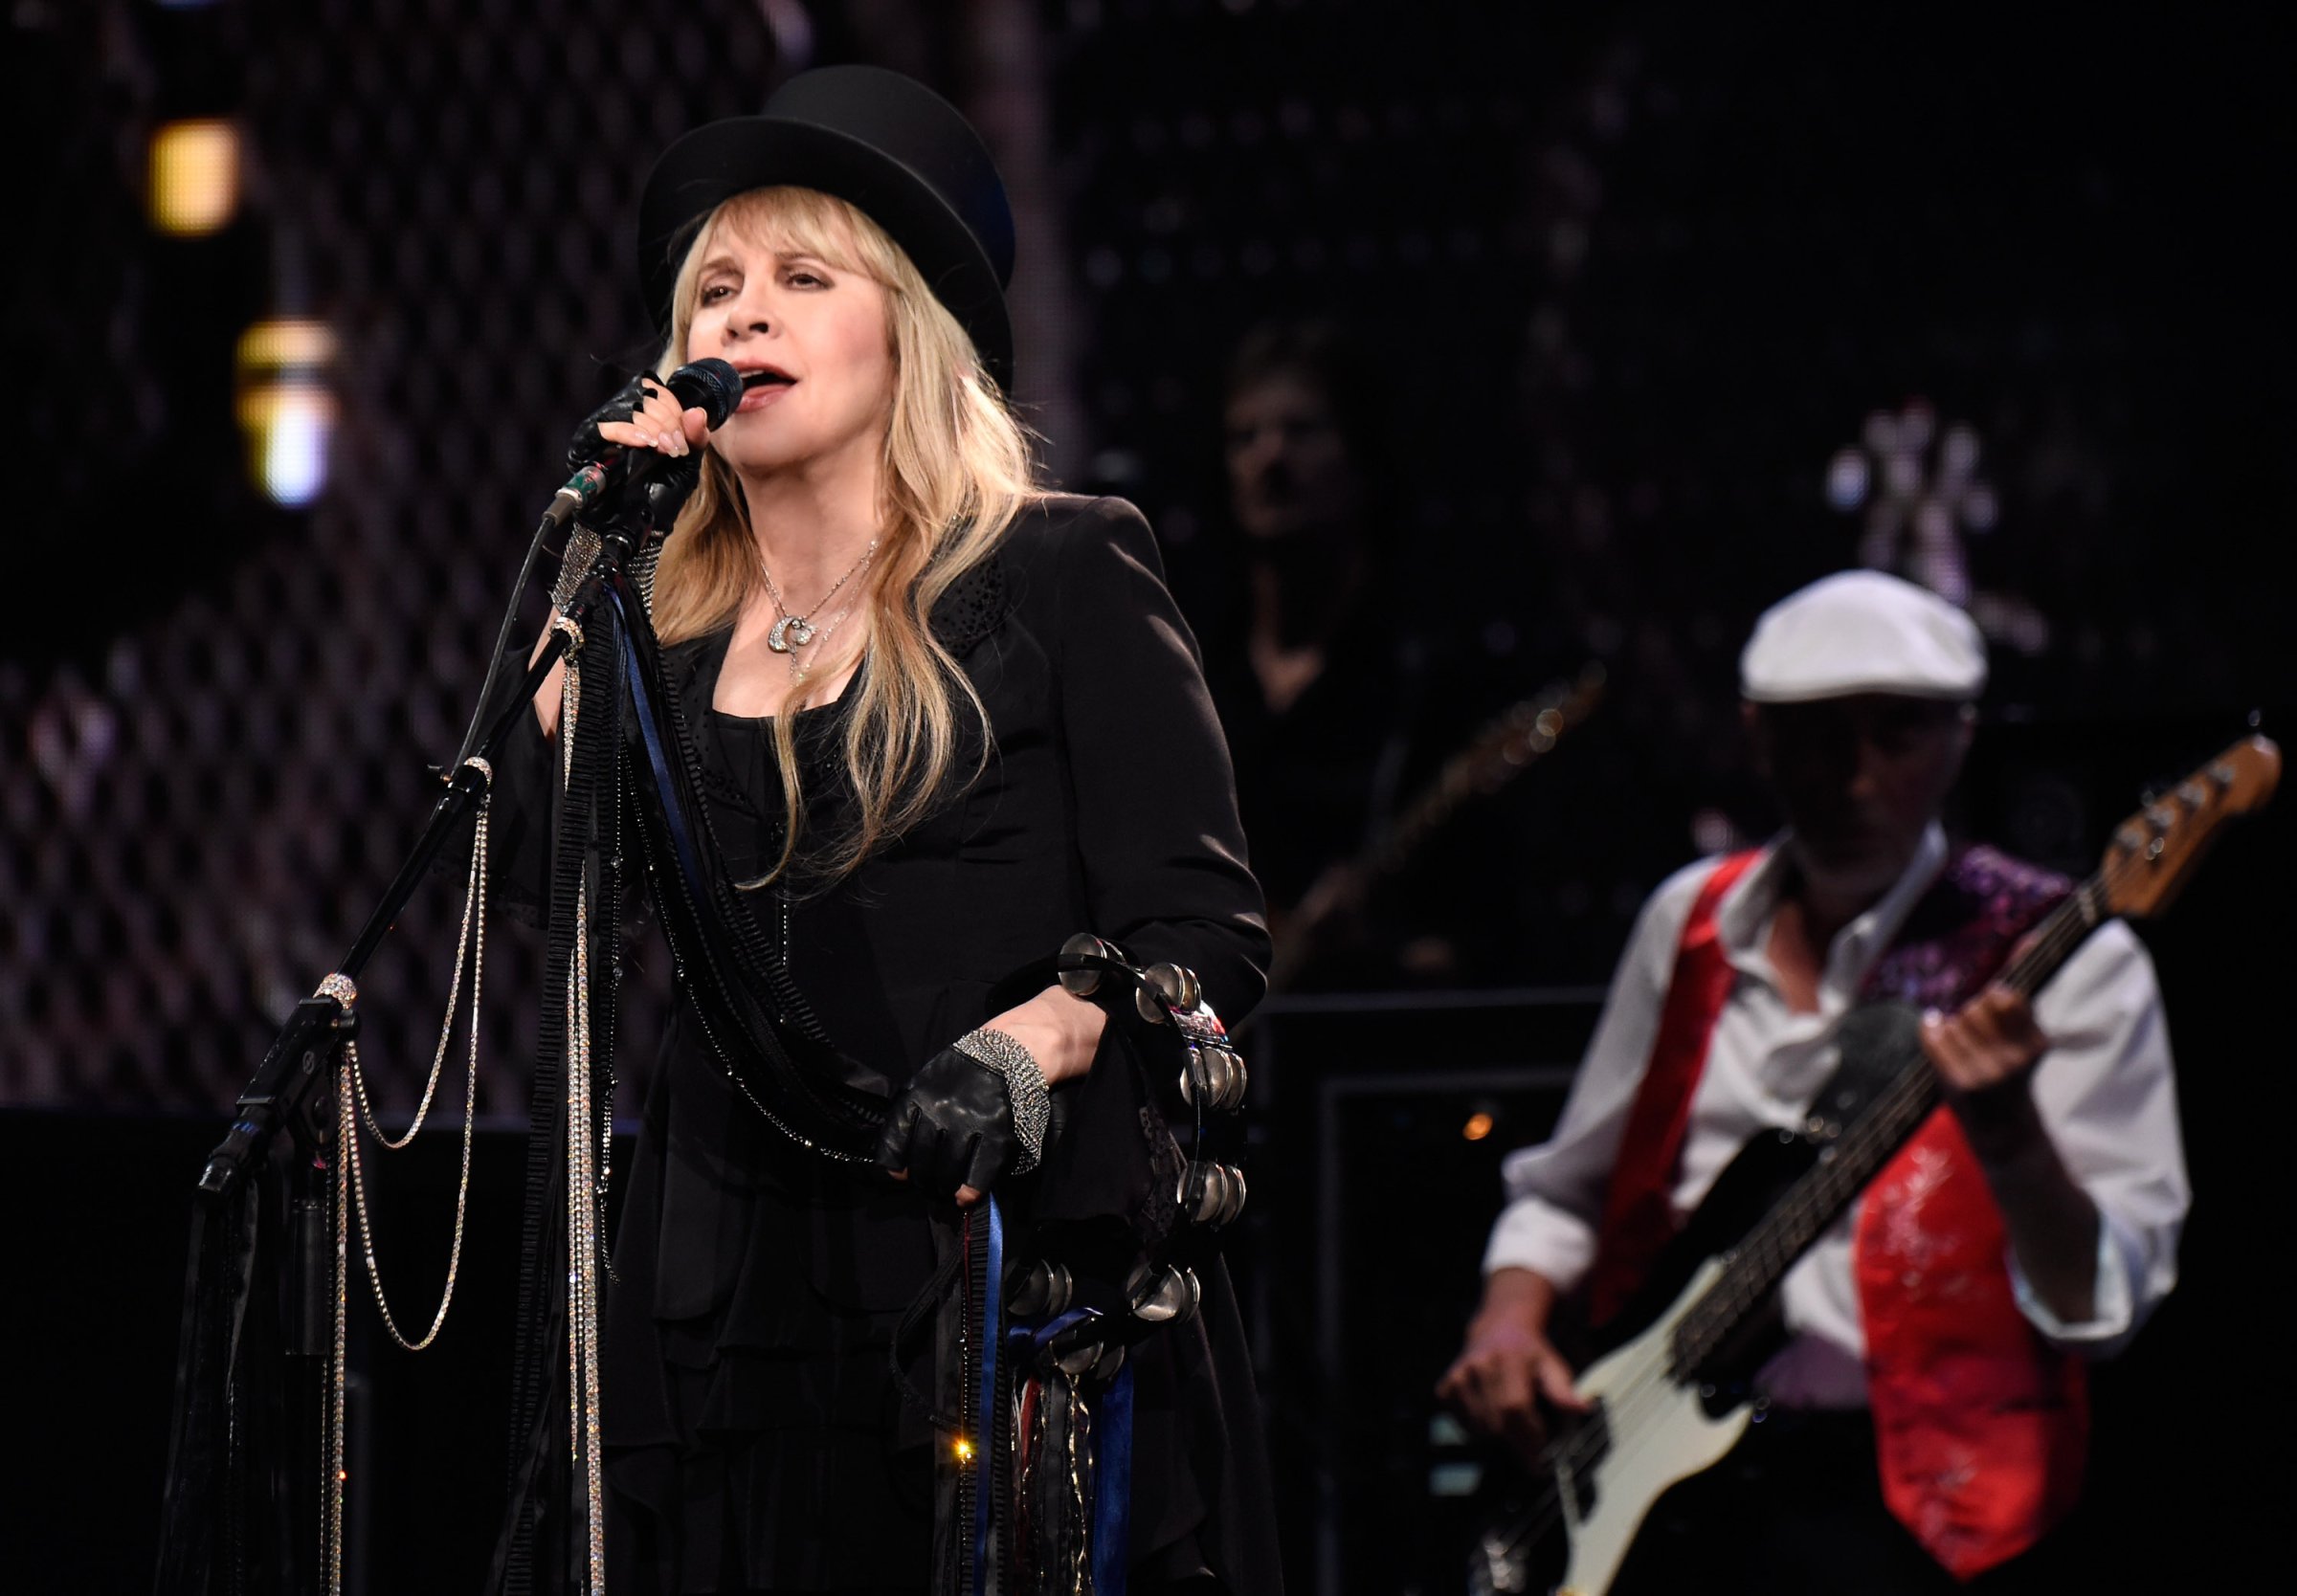 Stevie Nicks performs at Madison Square Garden on October 7, 2014 in New York City.